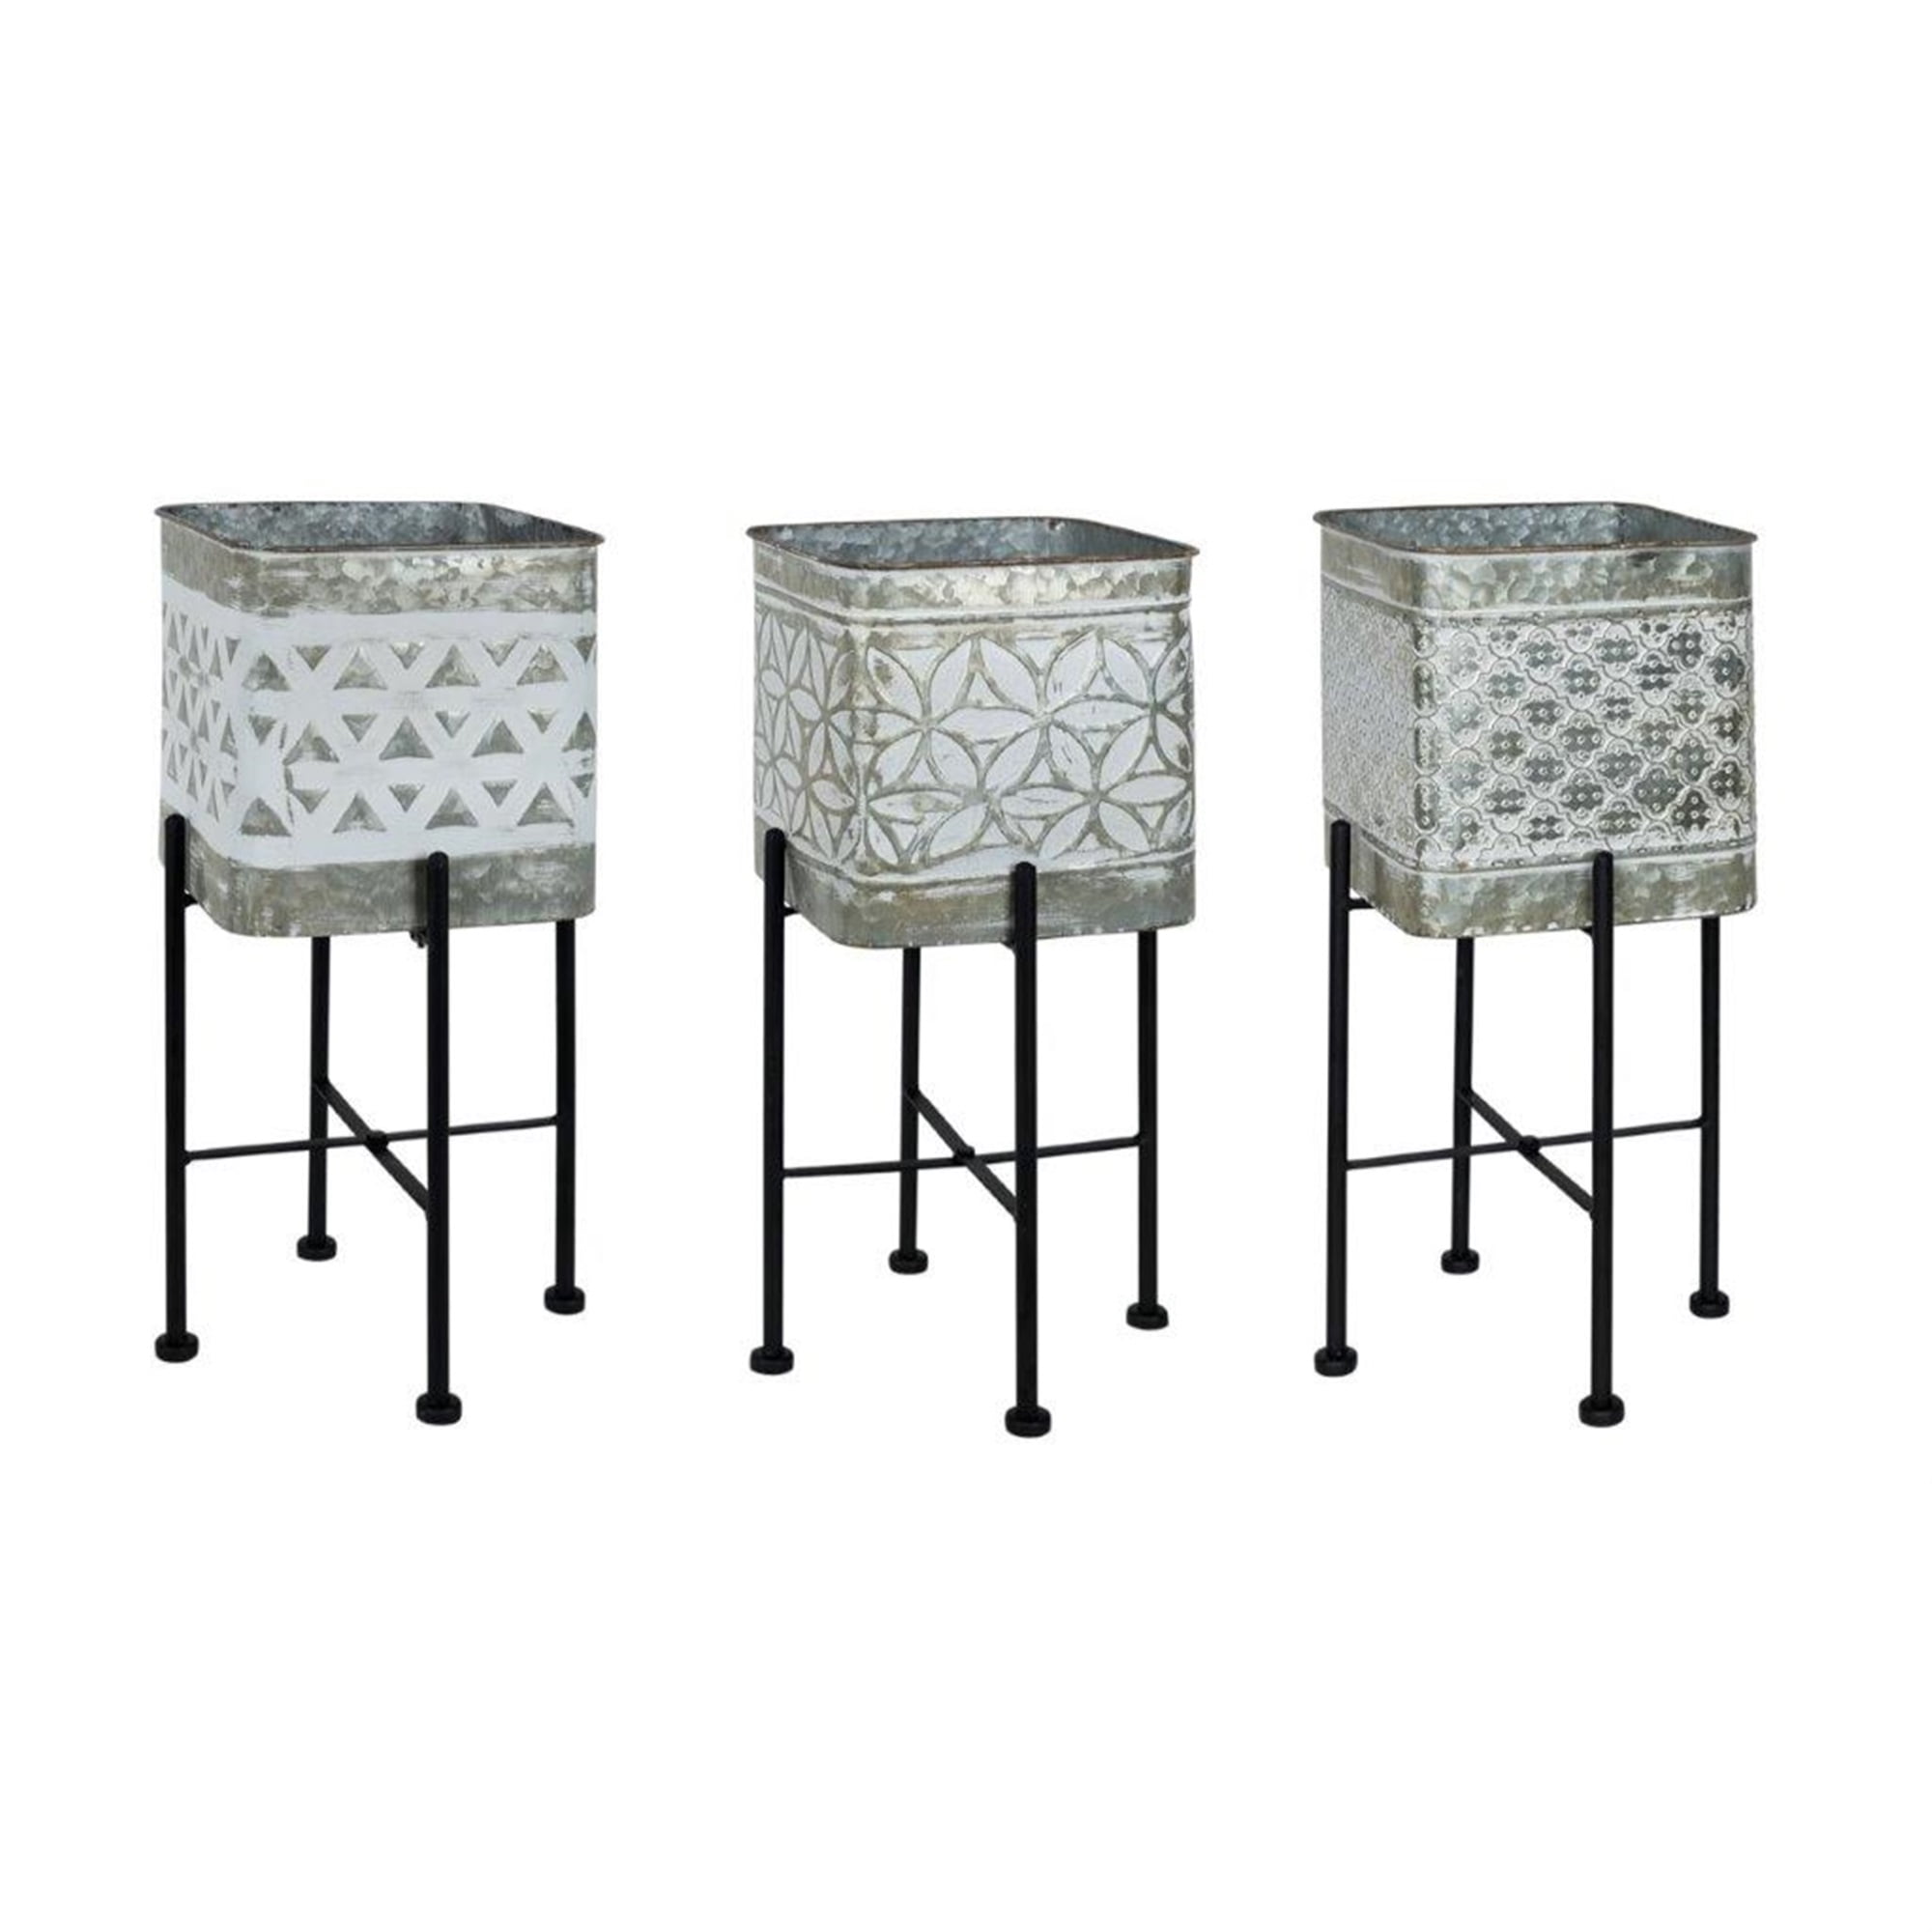 Planter with Stand (Set of 3) 10.25"D x 17.75"H Metal